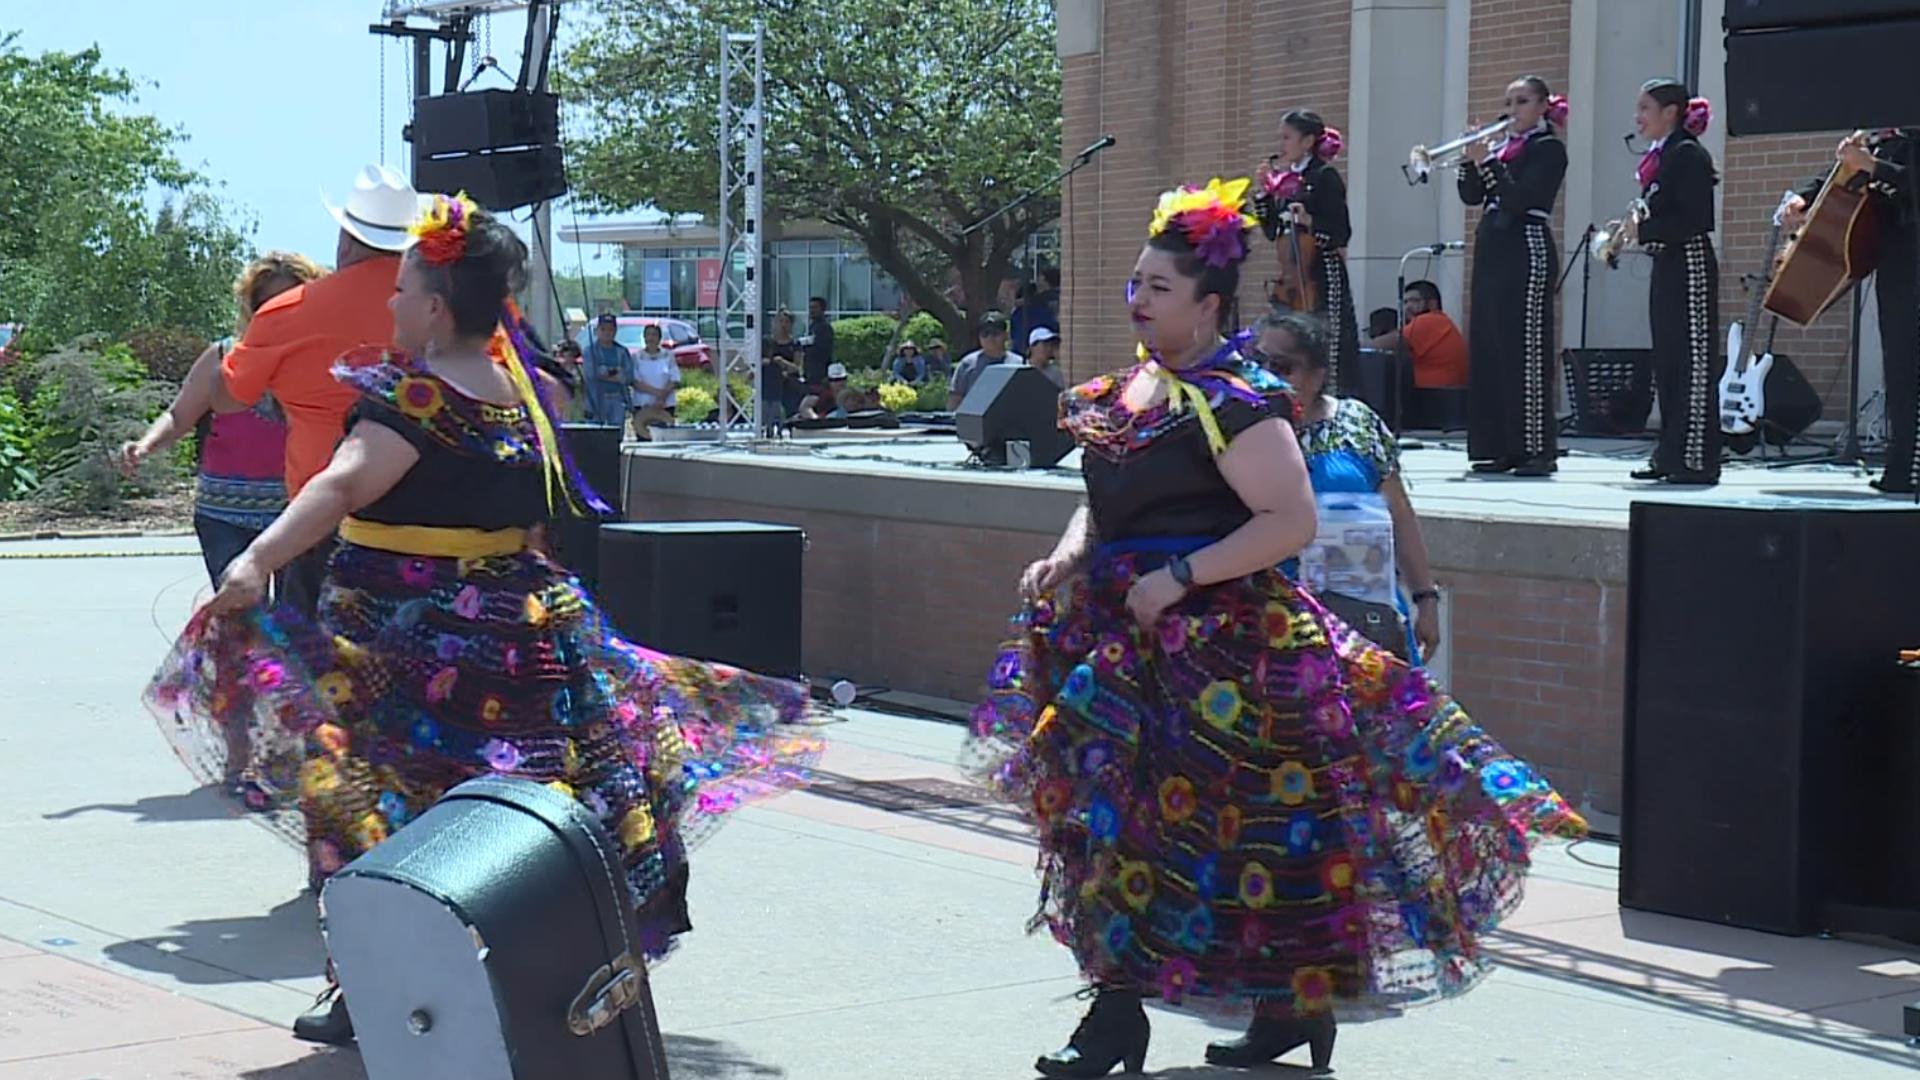 A Cinco de Mayo event took place in Springdale on Saturday, May 6.